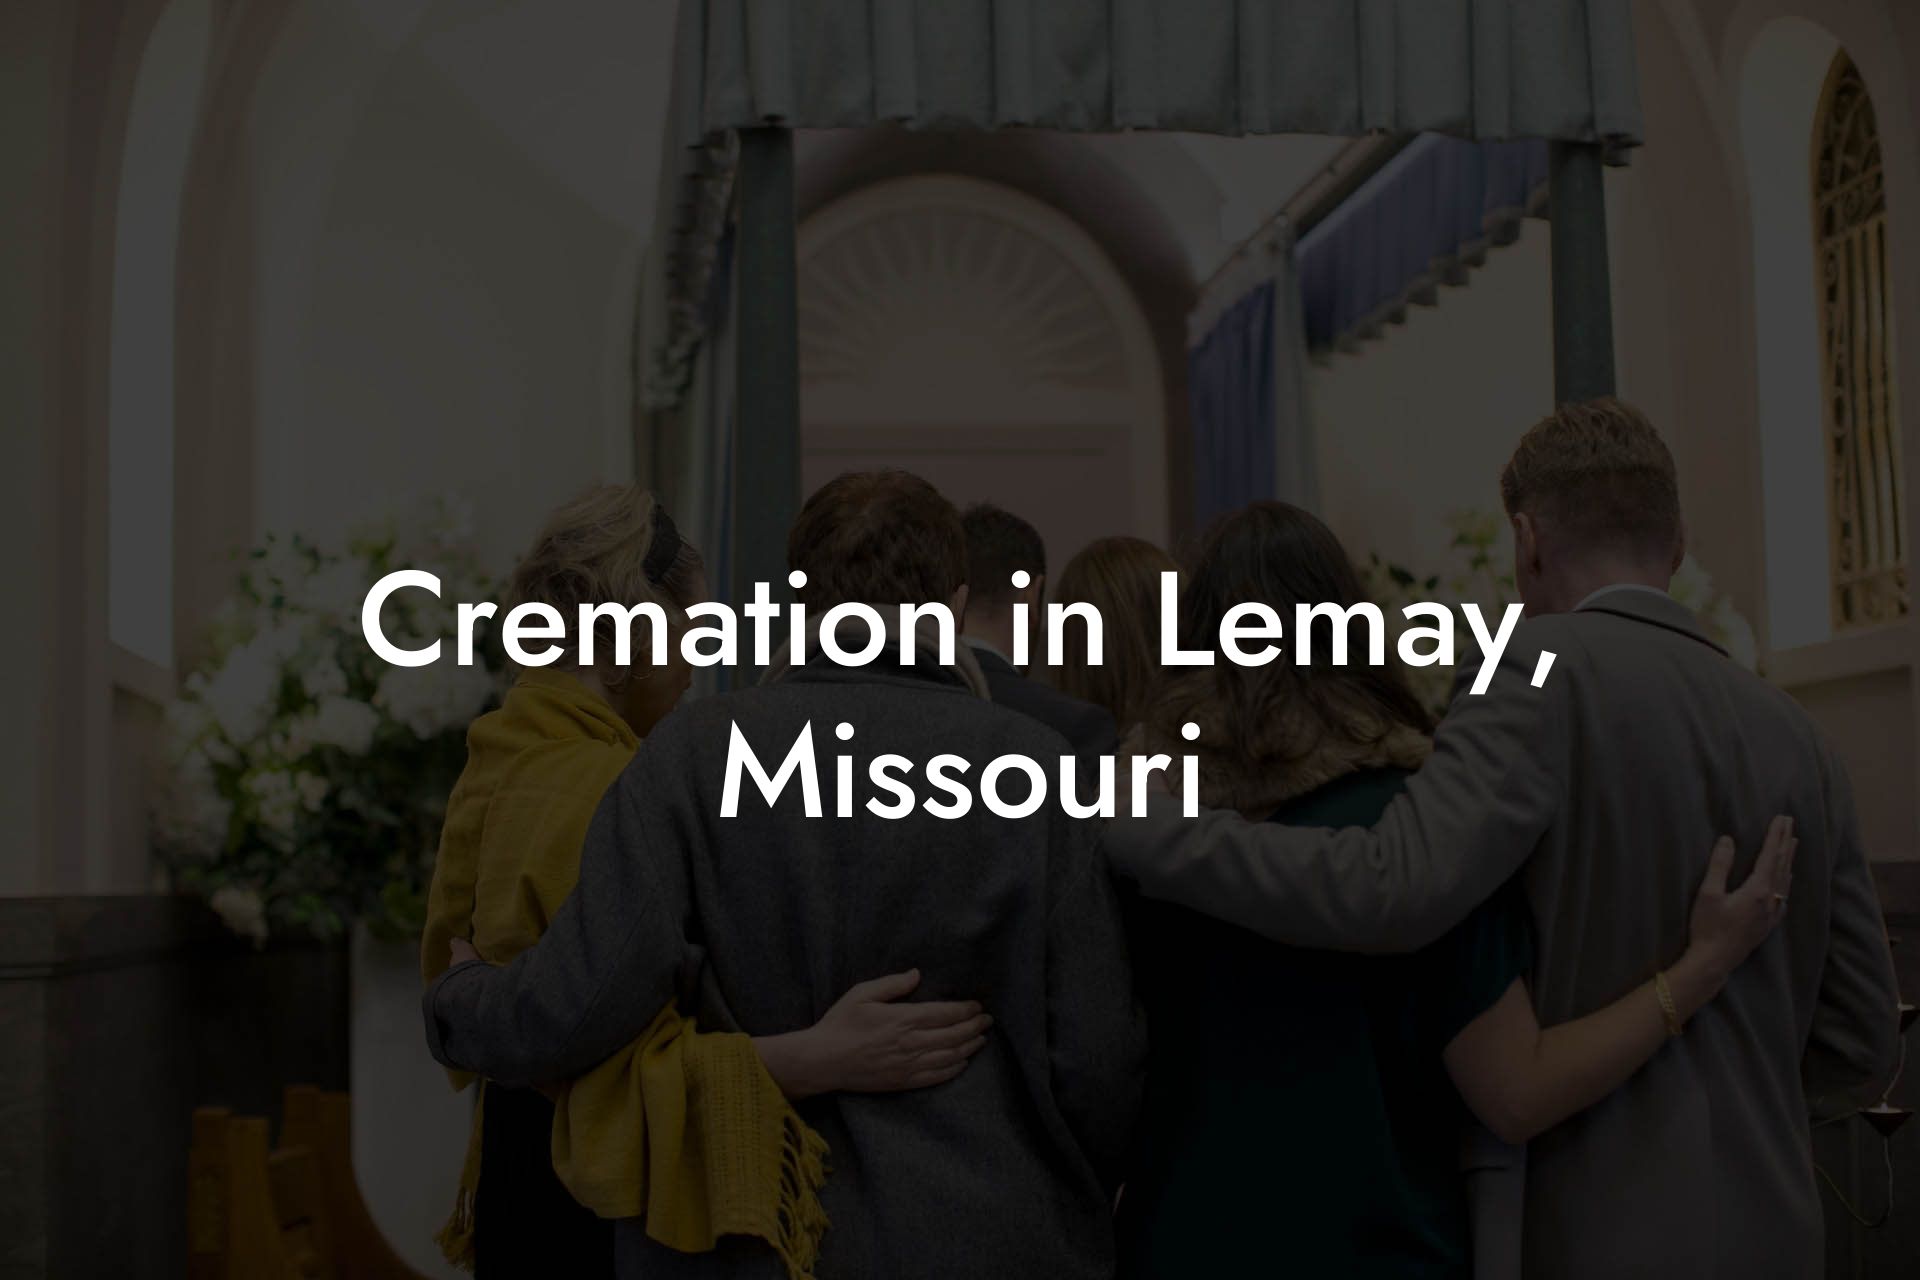 Cremation in Lemay, Missouri